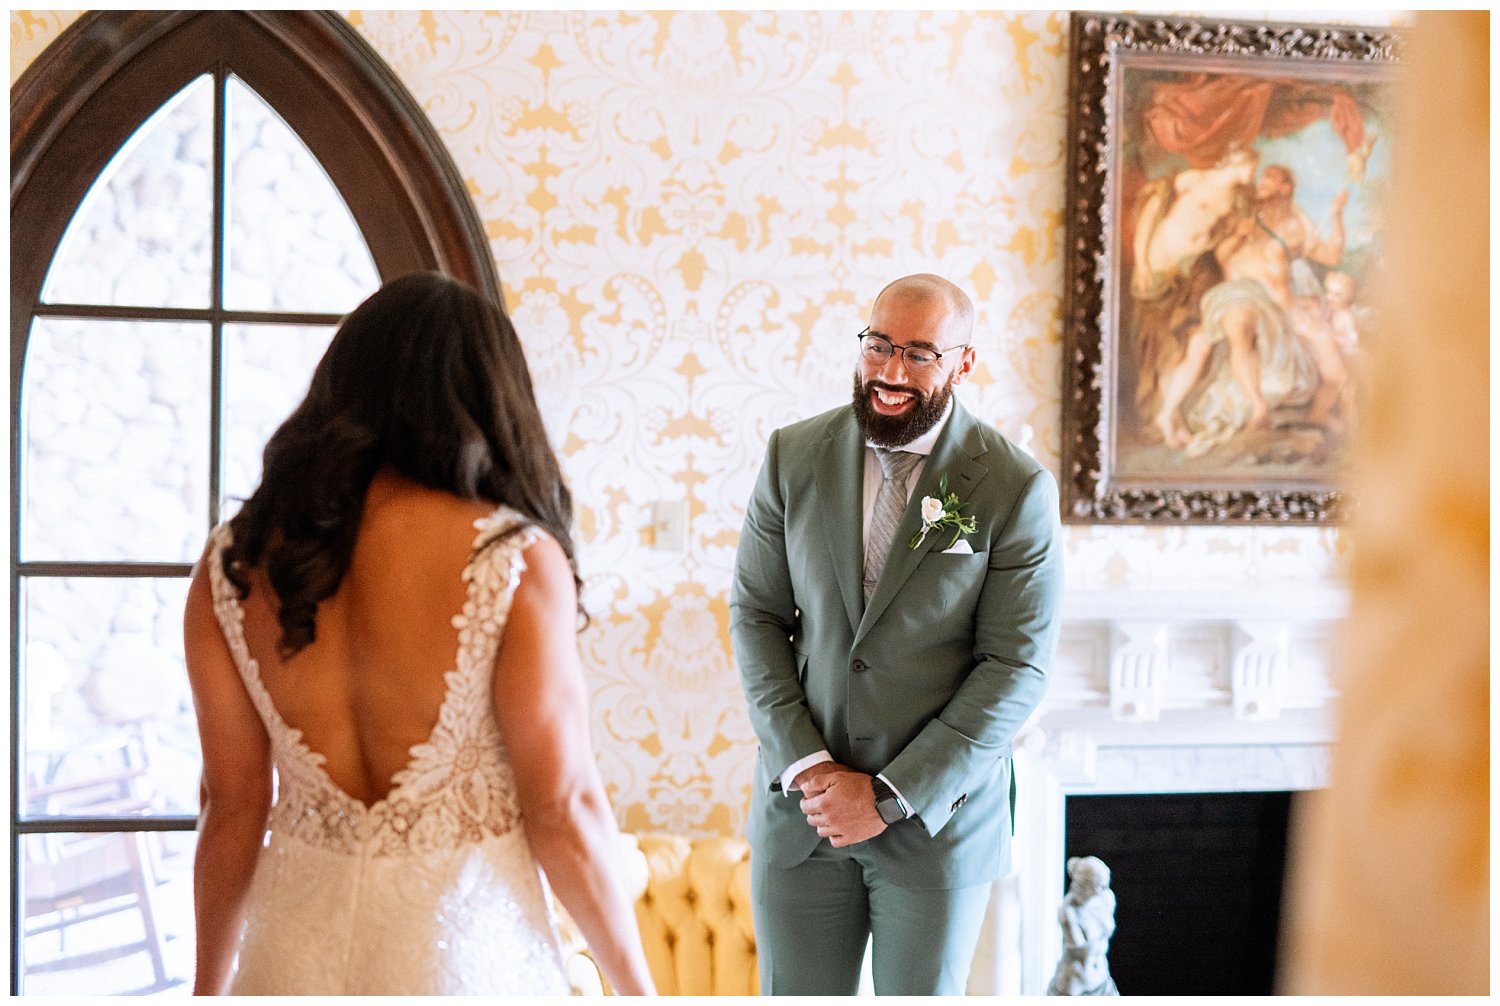 First Looks at Dover Hall Estate Wedding